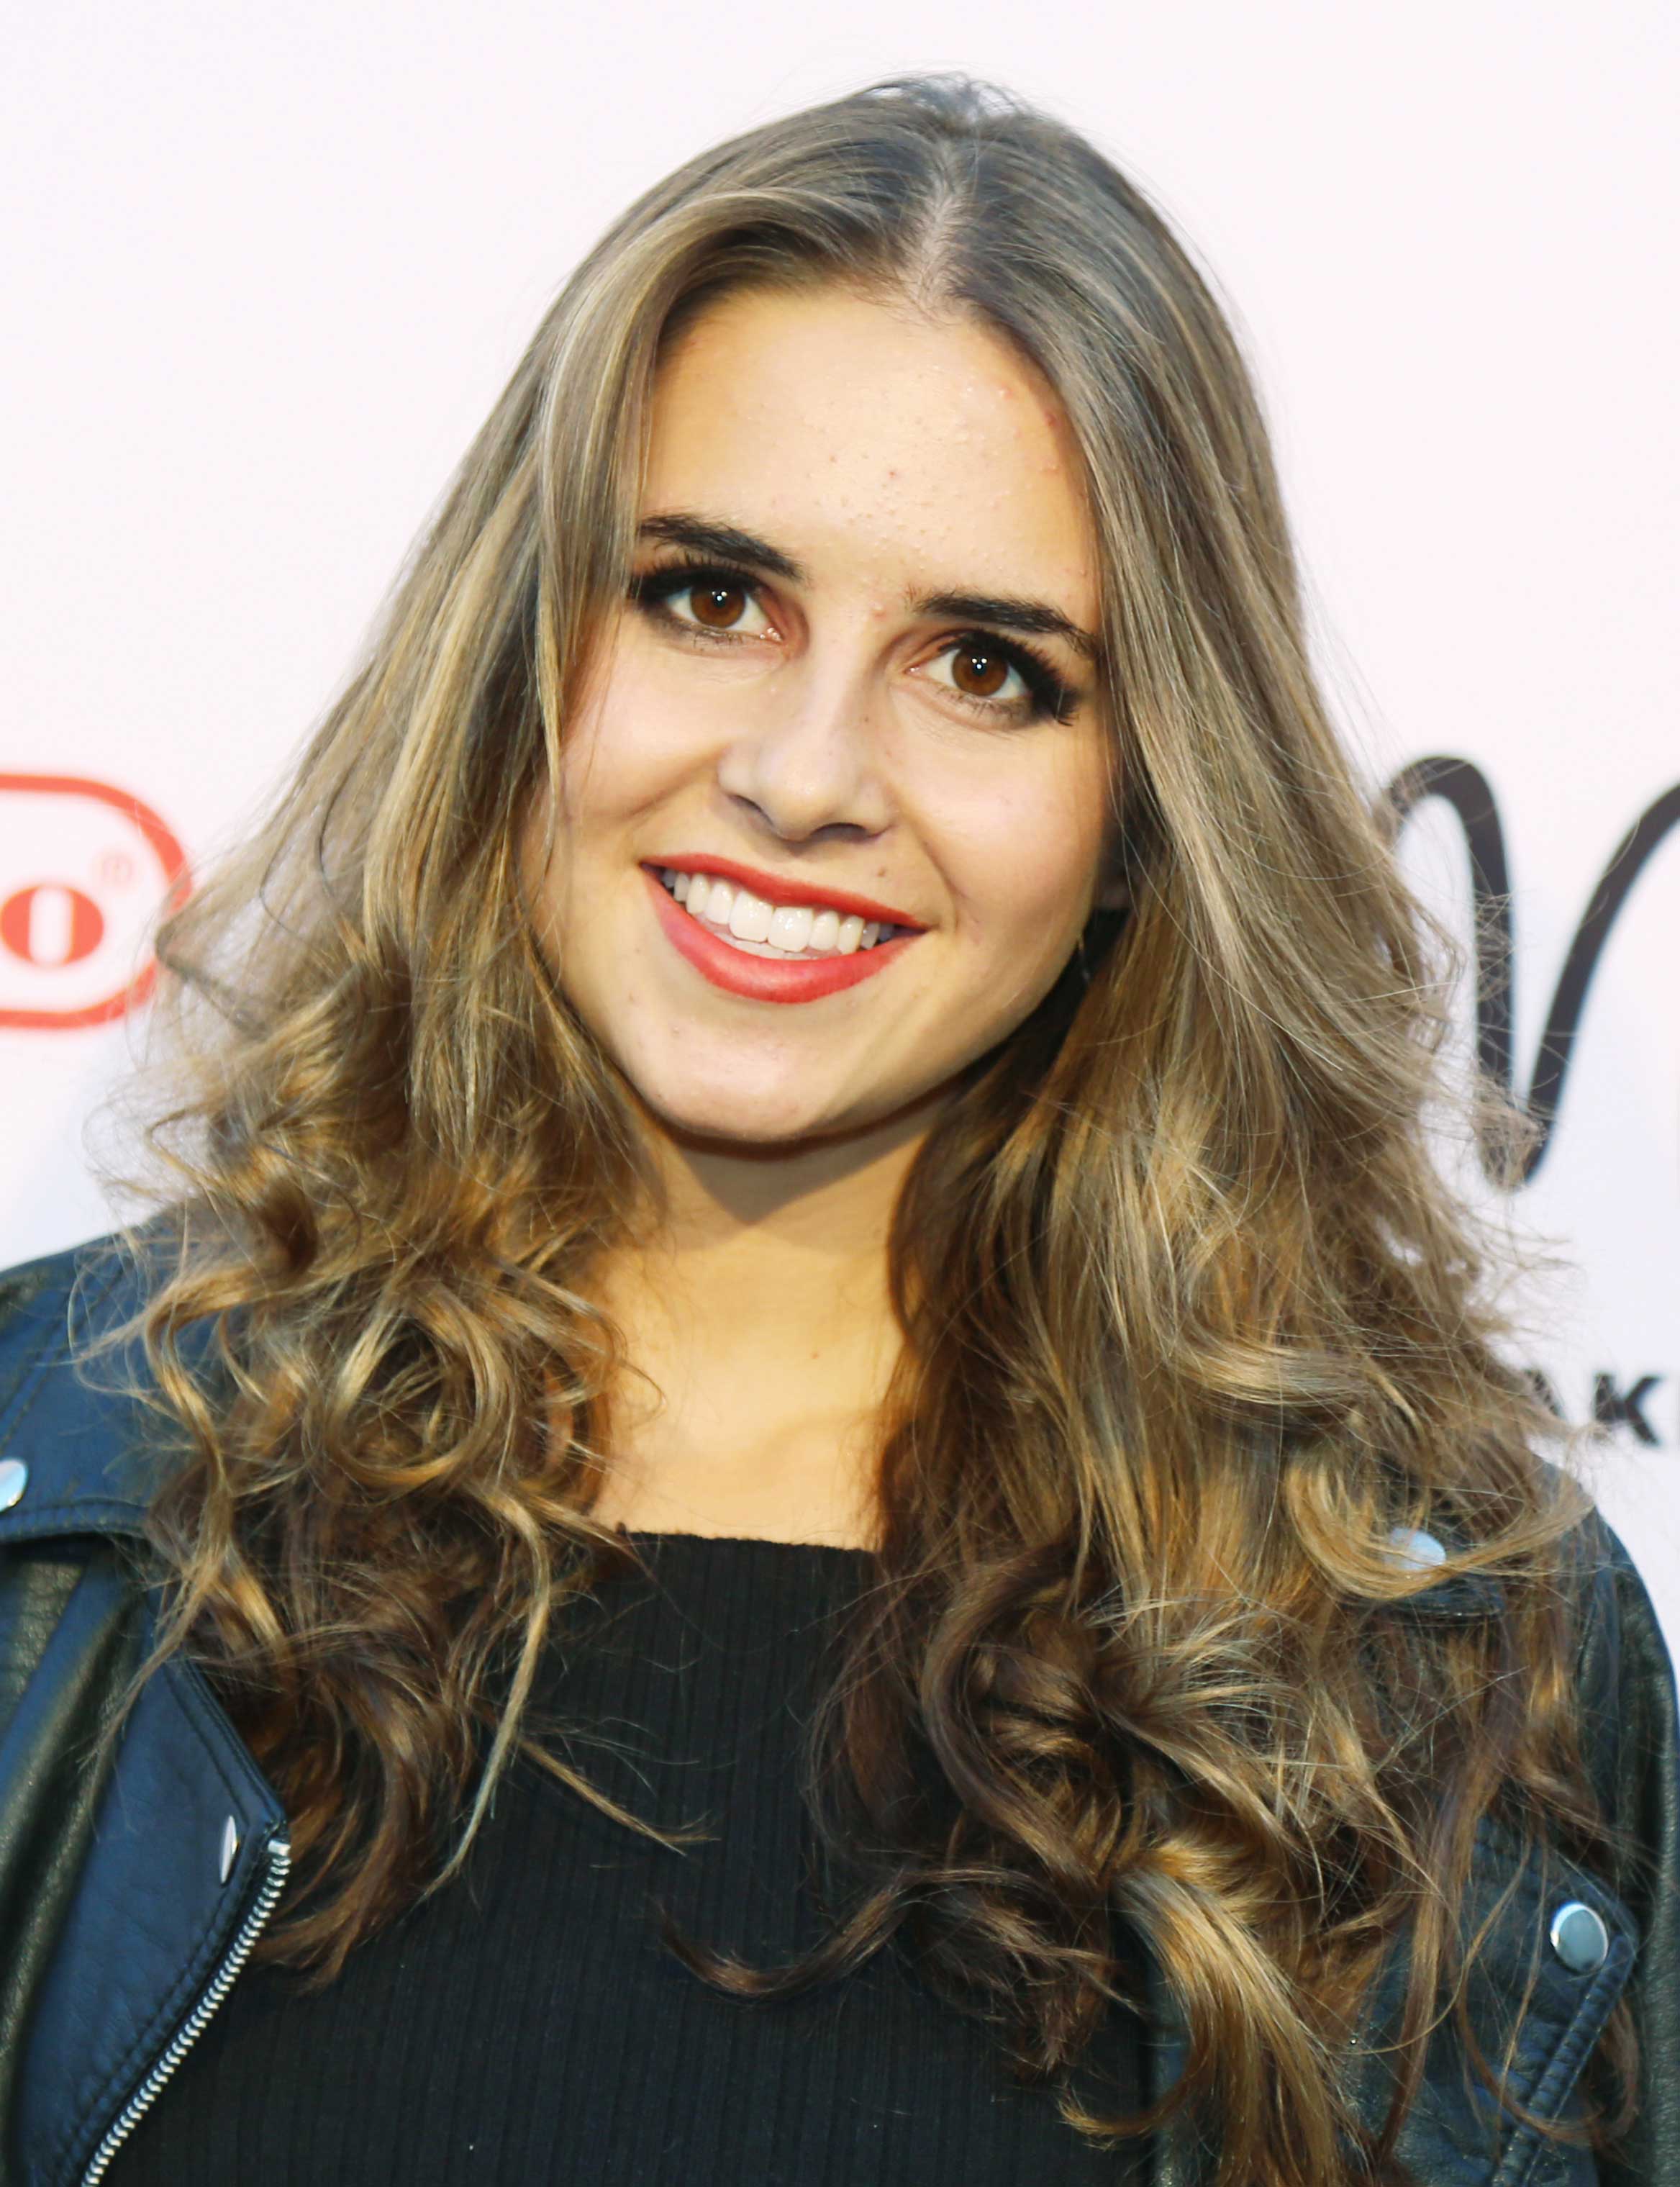 Carly Rose Sonenclar attends Dream Halloween 2017 Costume Party